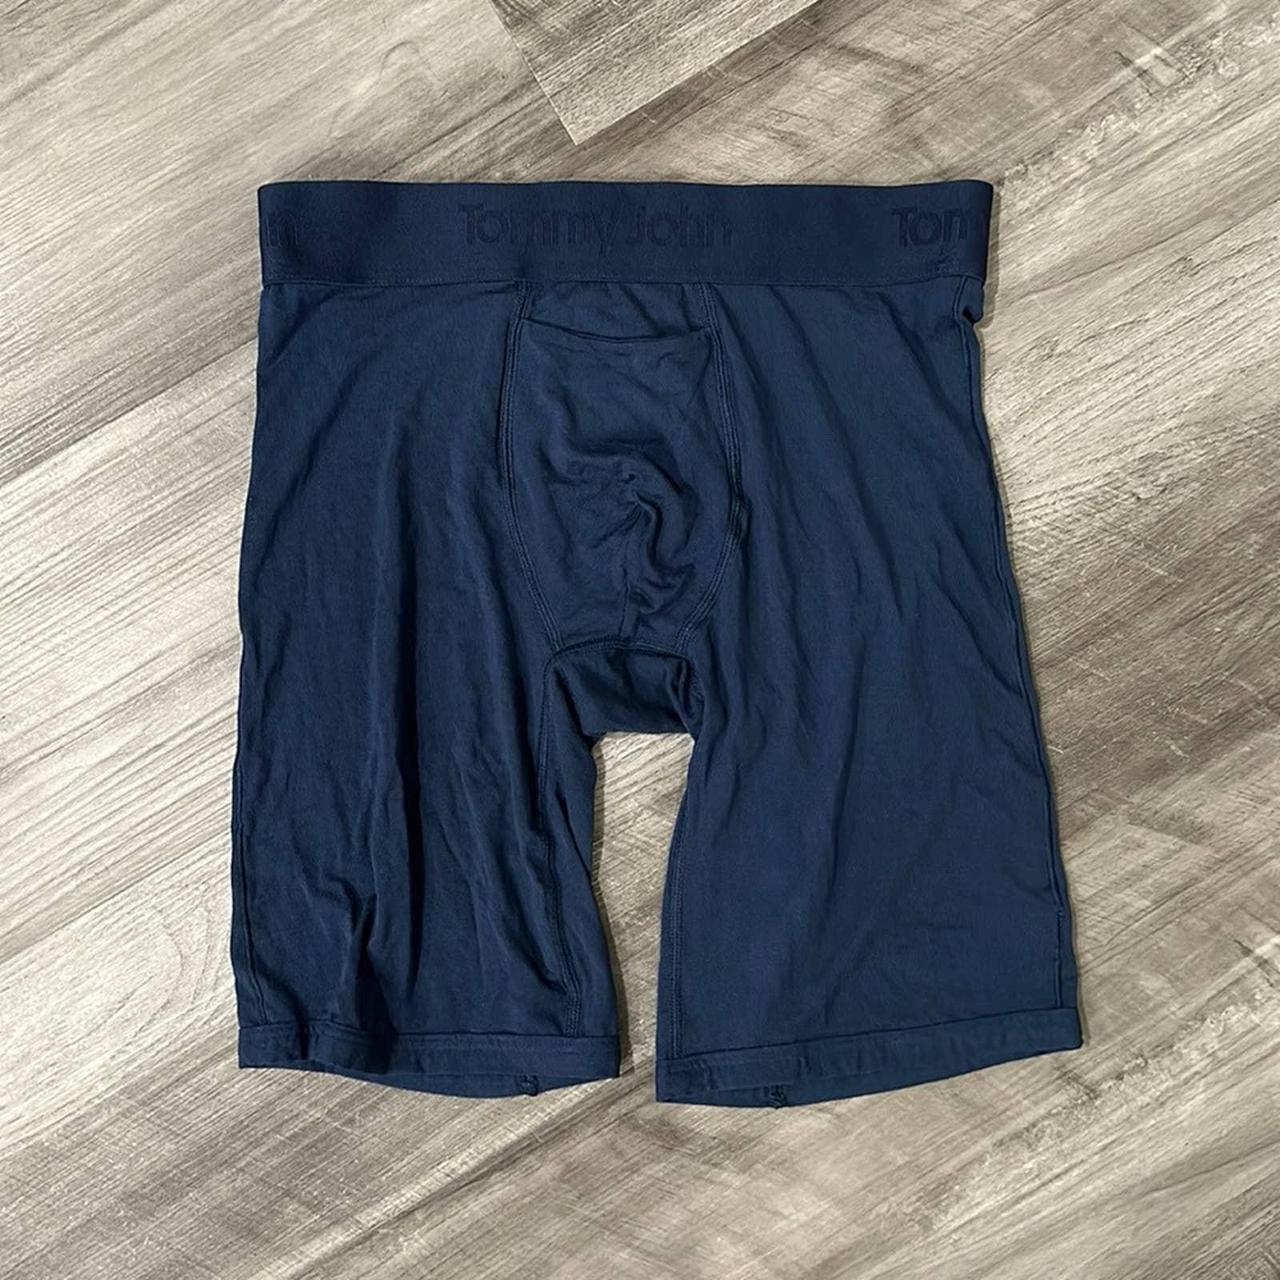 Tommy John Second Skin Boxer Brief Item is NWOT and... - Depop